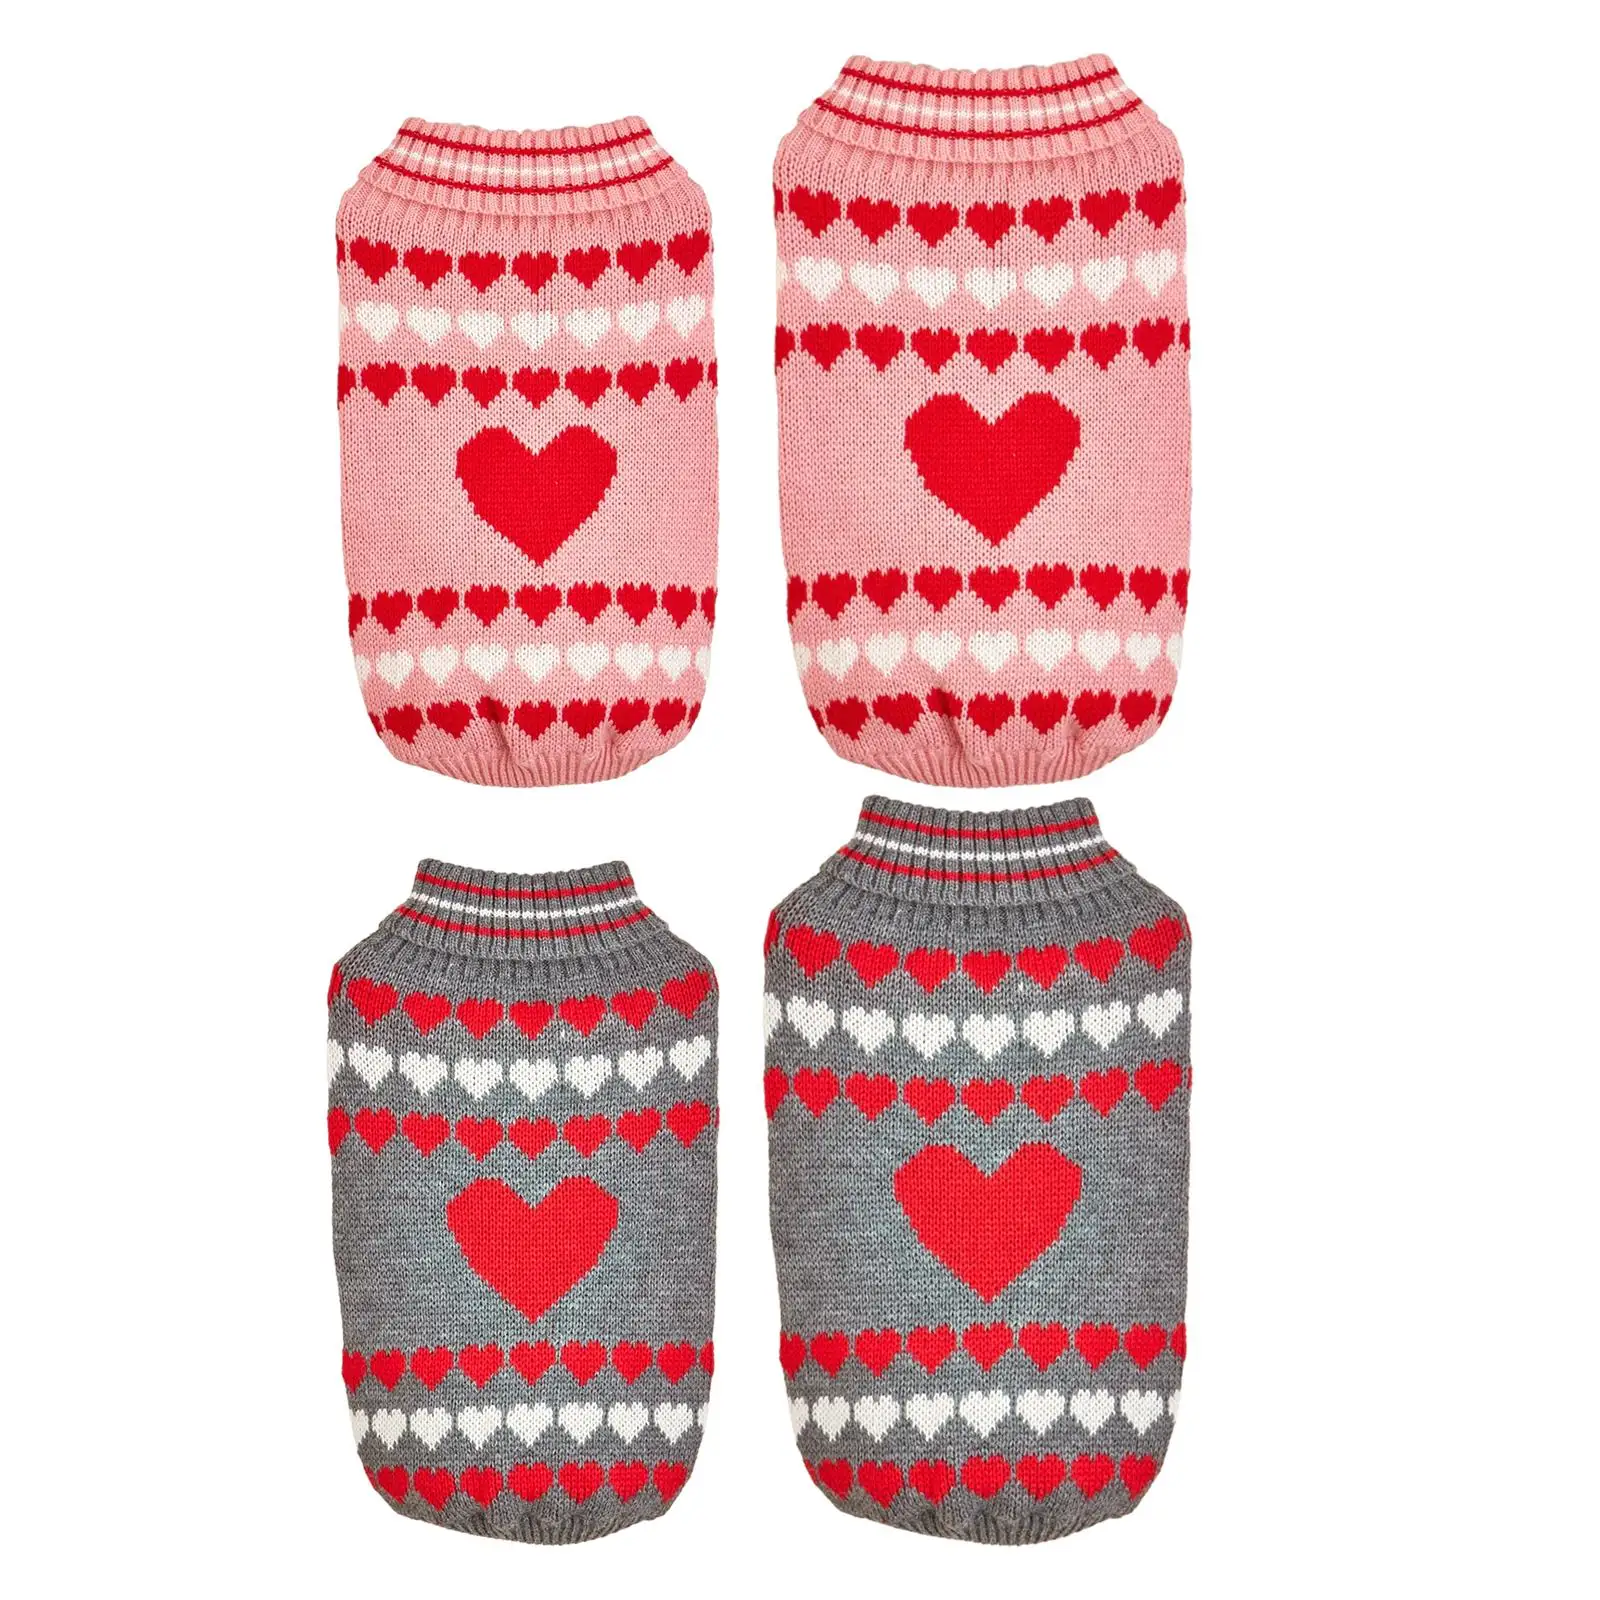 Heart Puppy Dog Sweaters Clothes Valentine's Day Dog Sweaters for Cats Dogs